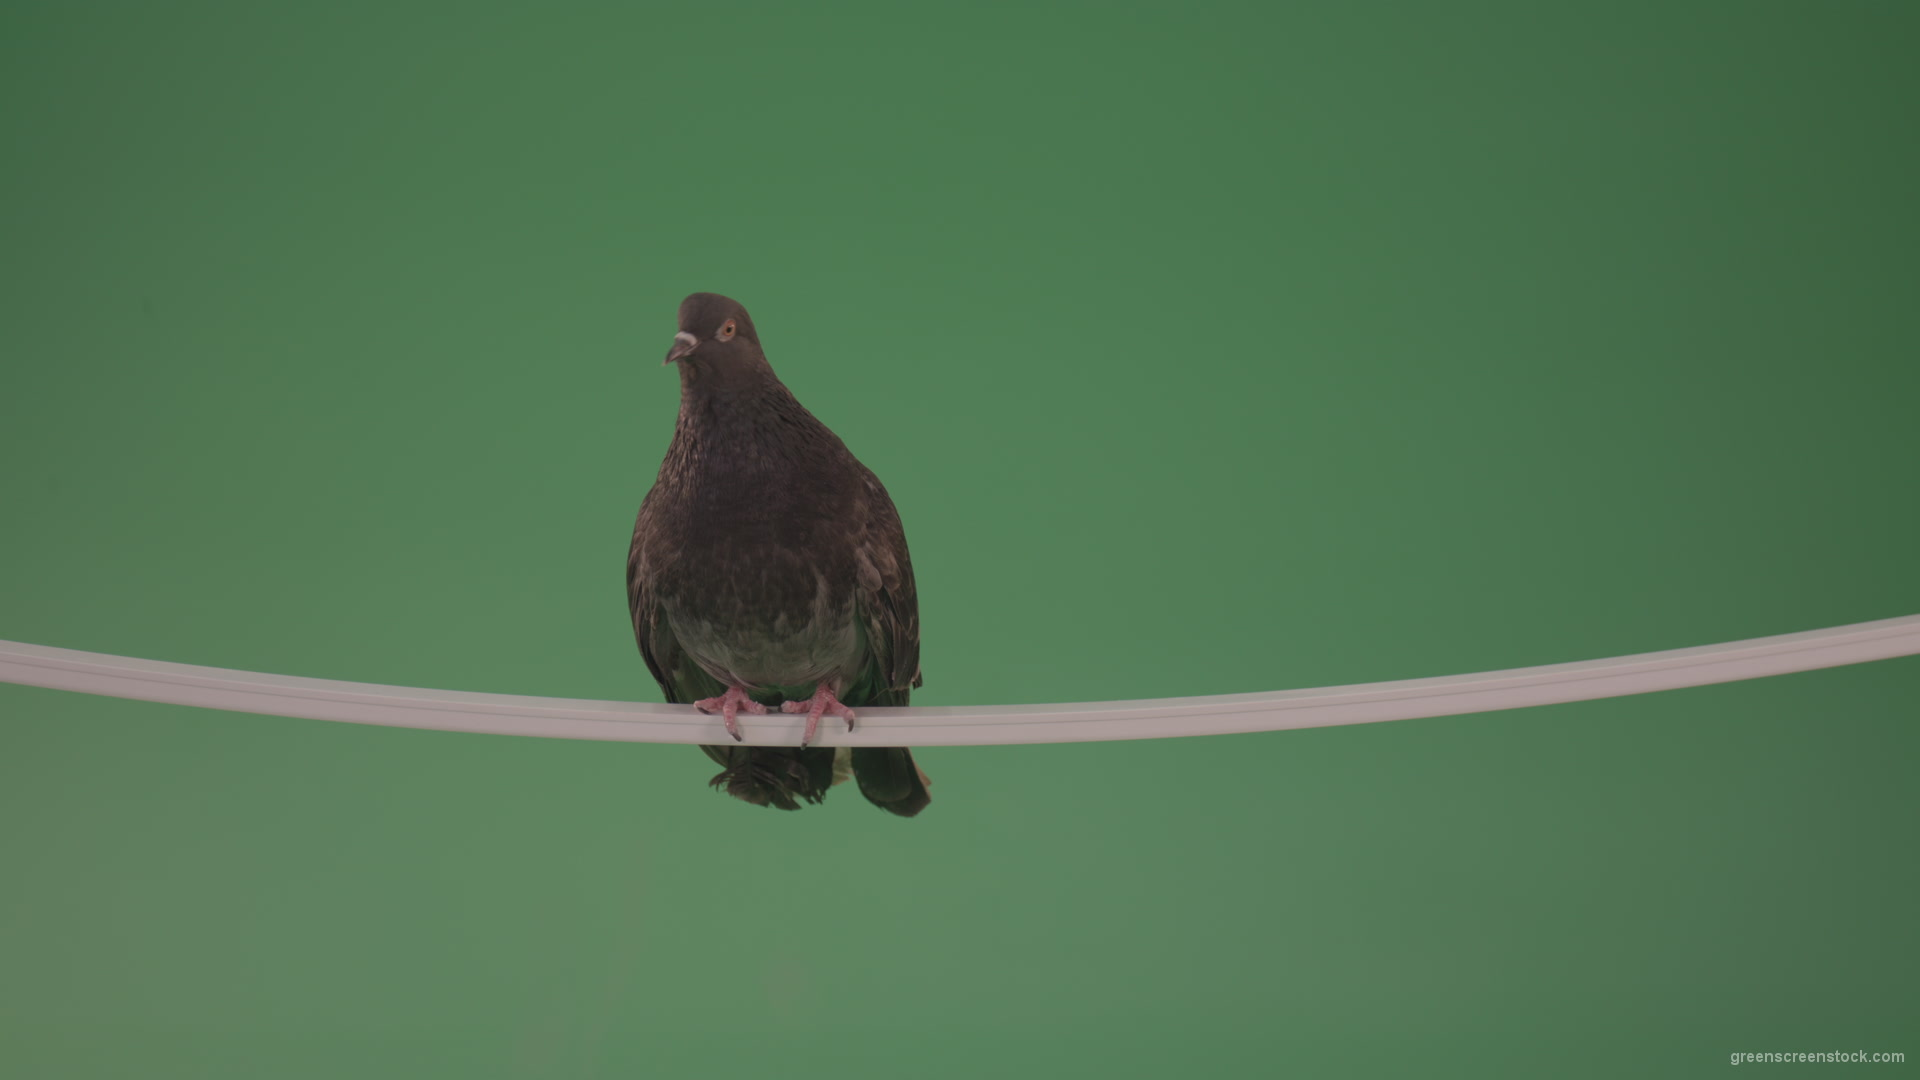 Sitting-bird-doves-on-a-pipe-in-a-big-city-isolated-on-chromakey-background_006 Green Screen Stock